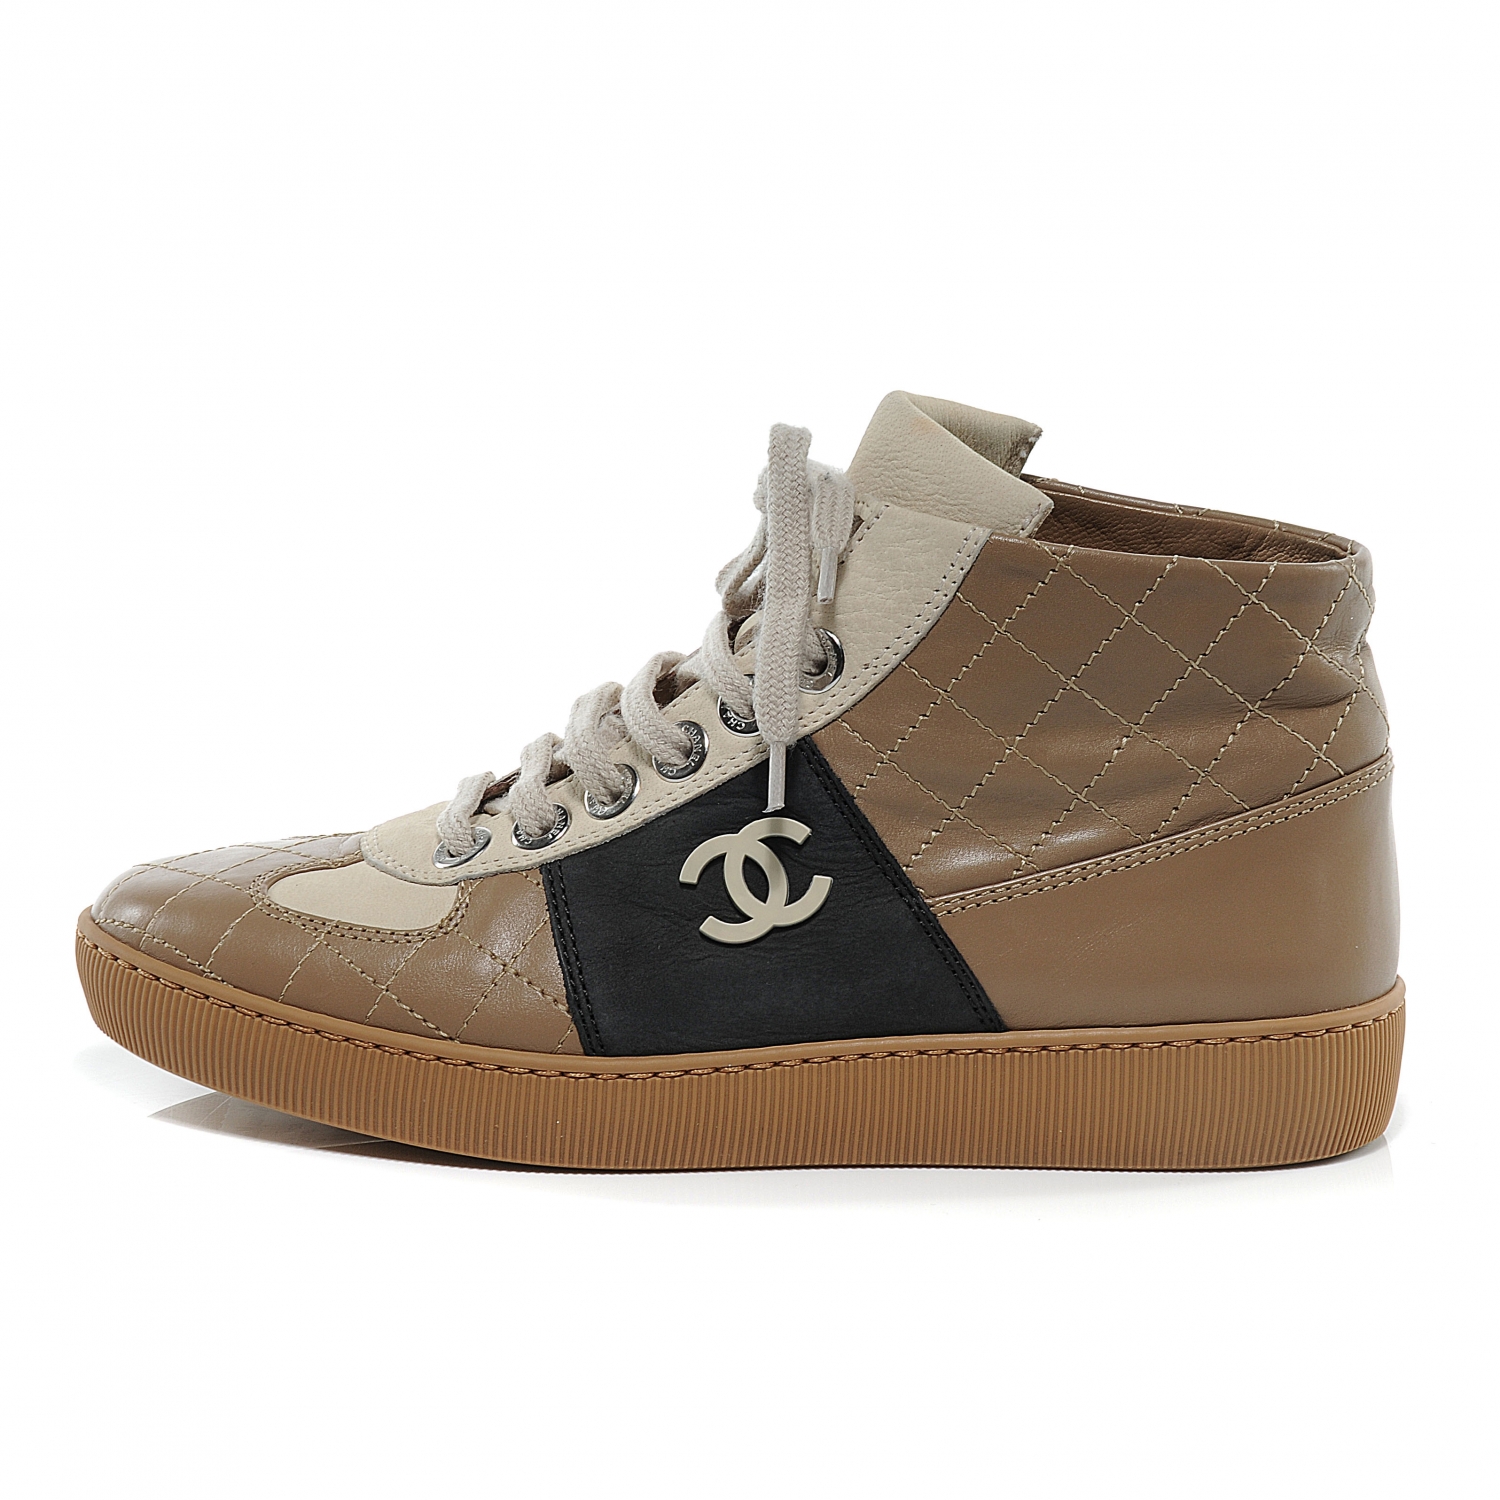 chanel high top tennis shoes